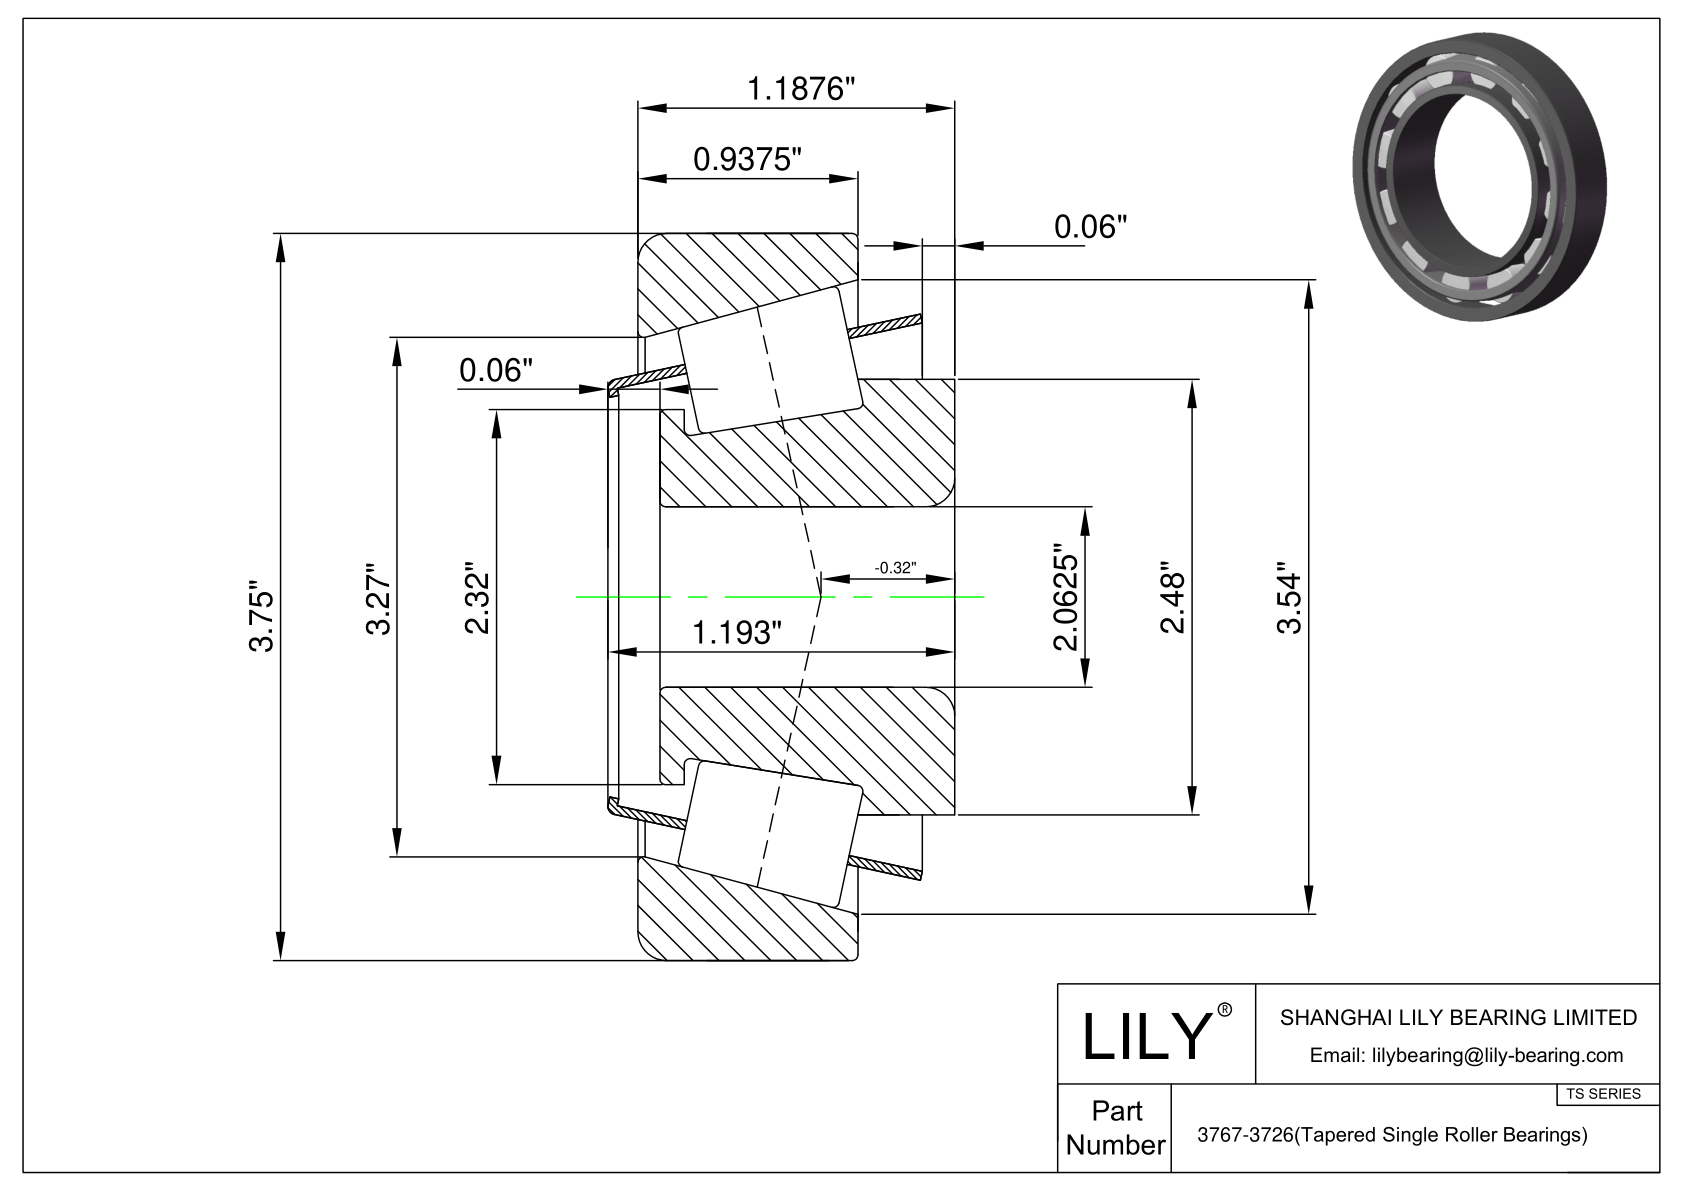 3767-3726 TS (Tapered Single Roller Bearings) (Imperial) cad drawing